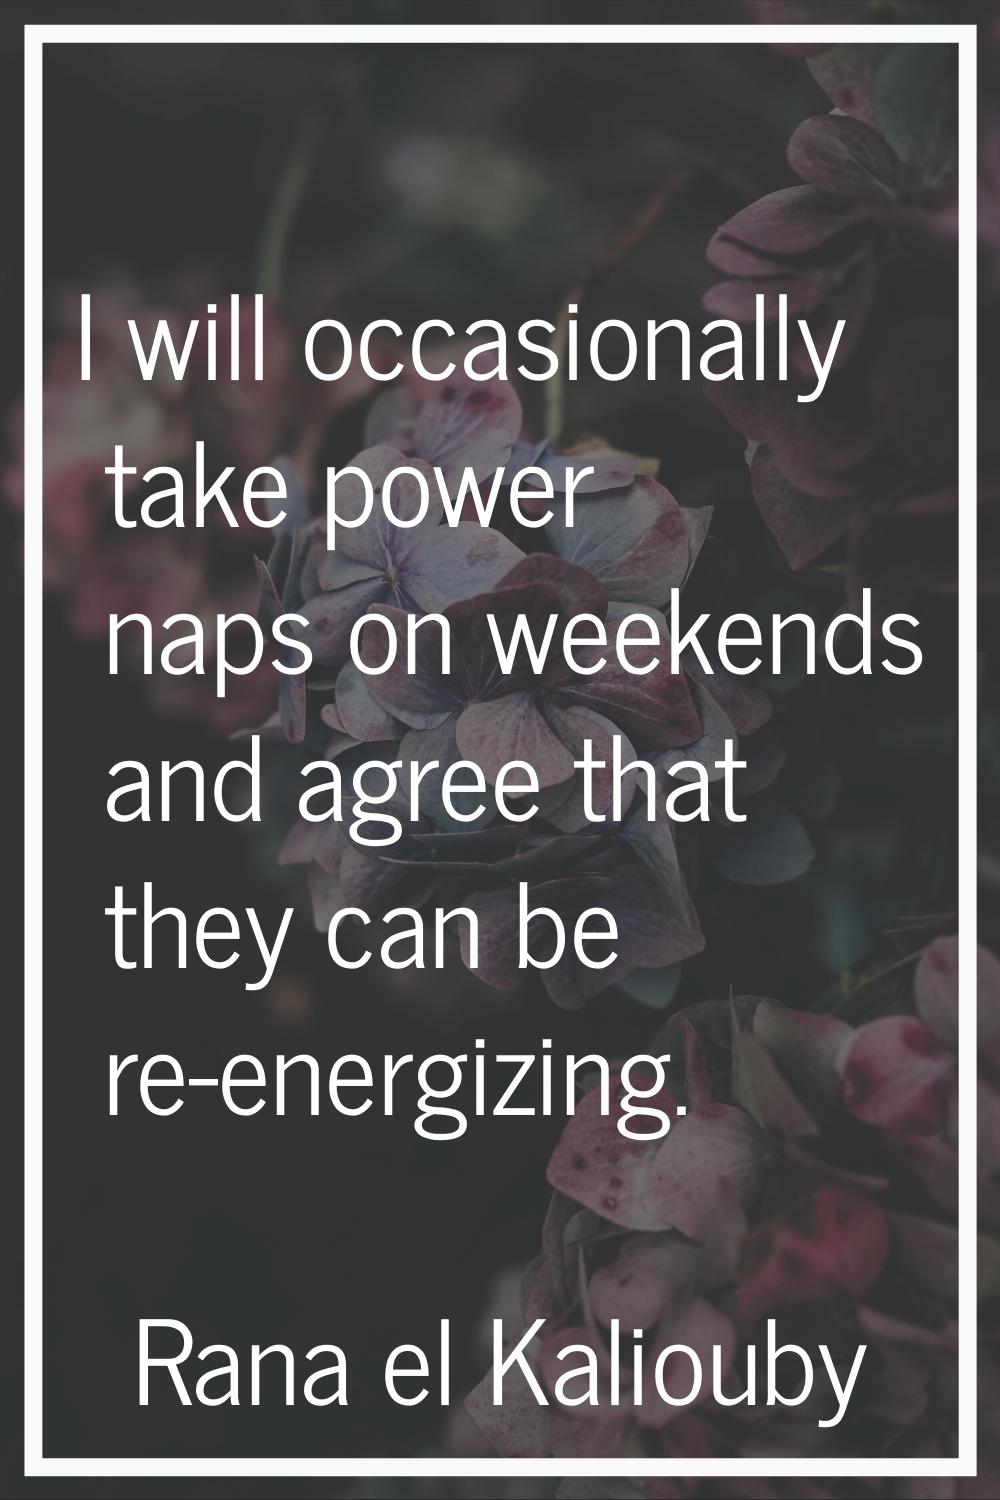 I will occasionally take power naps on weekends and agree that they can be re-energizing.